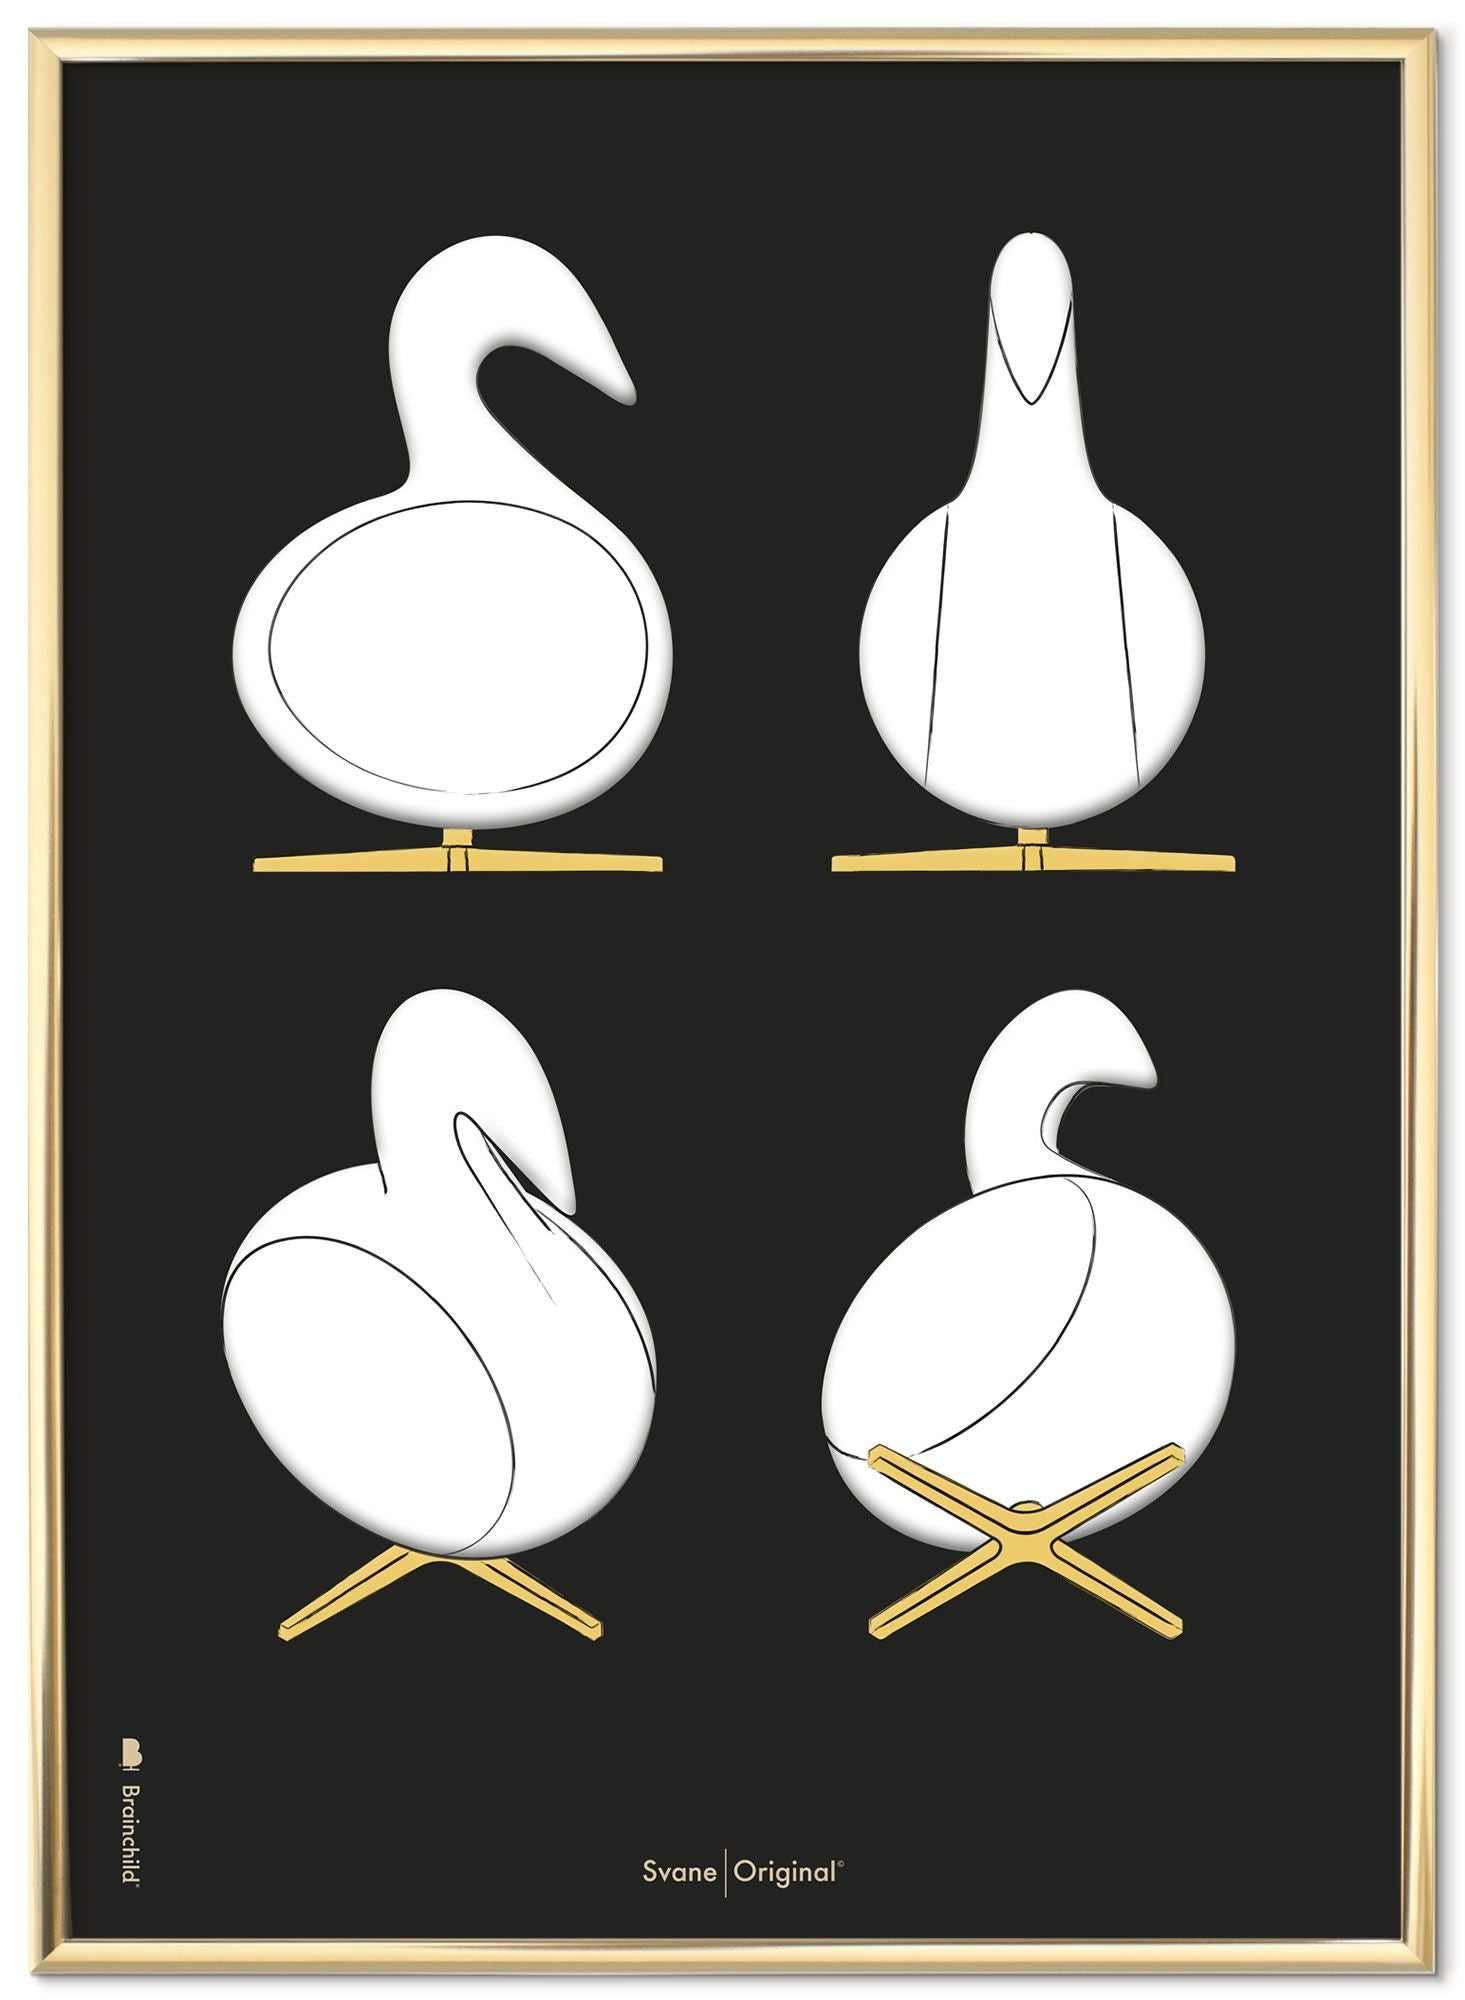 Brainchild Swan Design Sketches Poster Frame Made Of Brass Colored Metal A5, Black Background